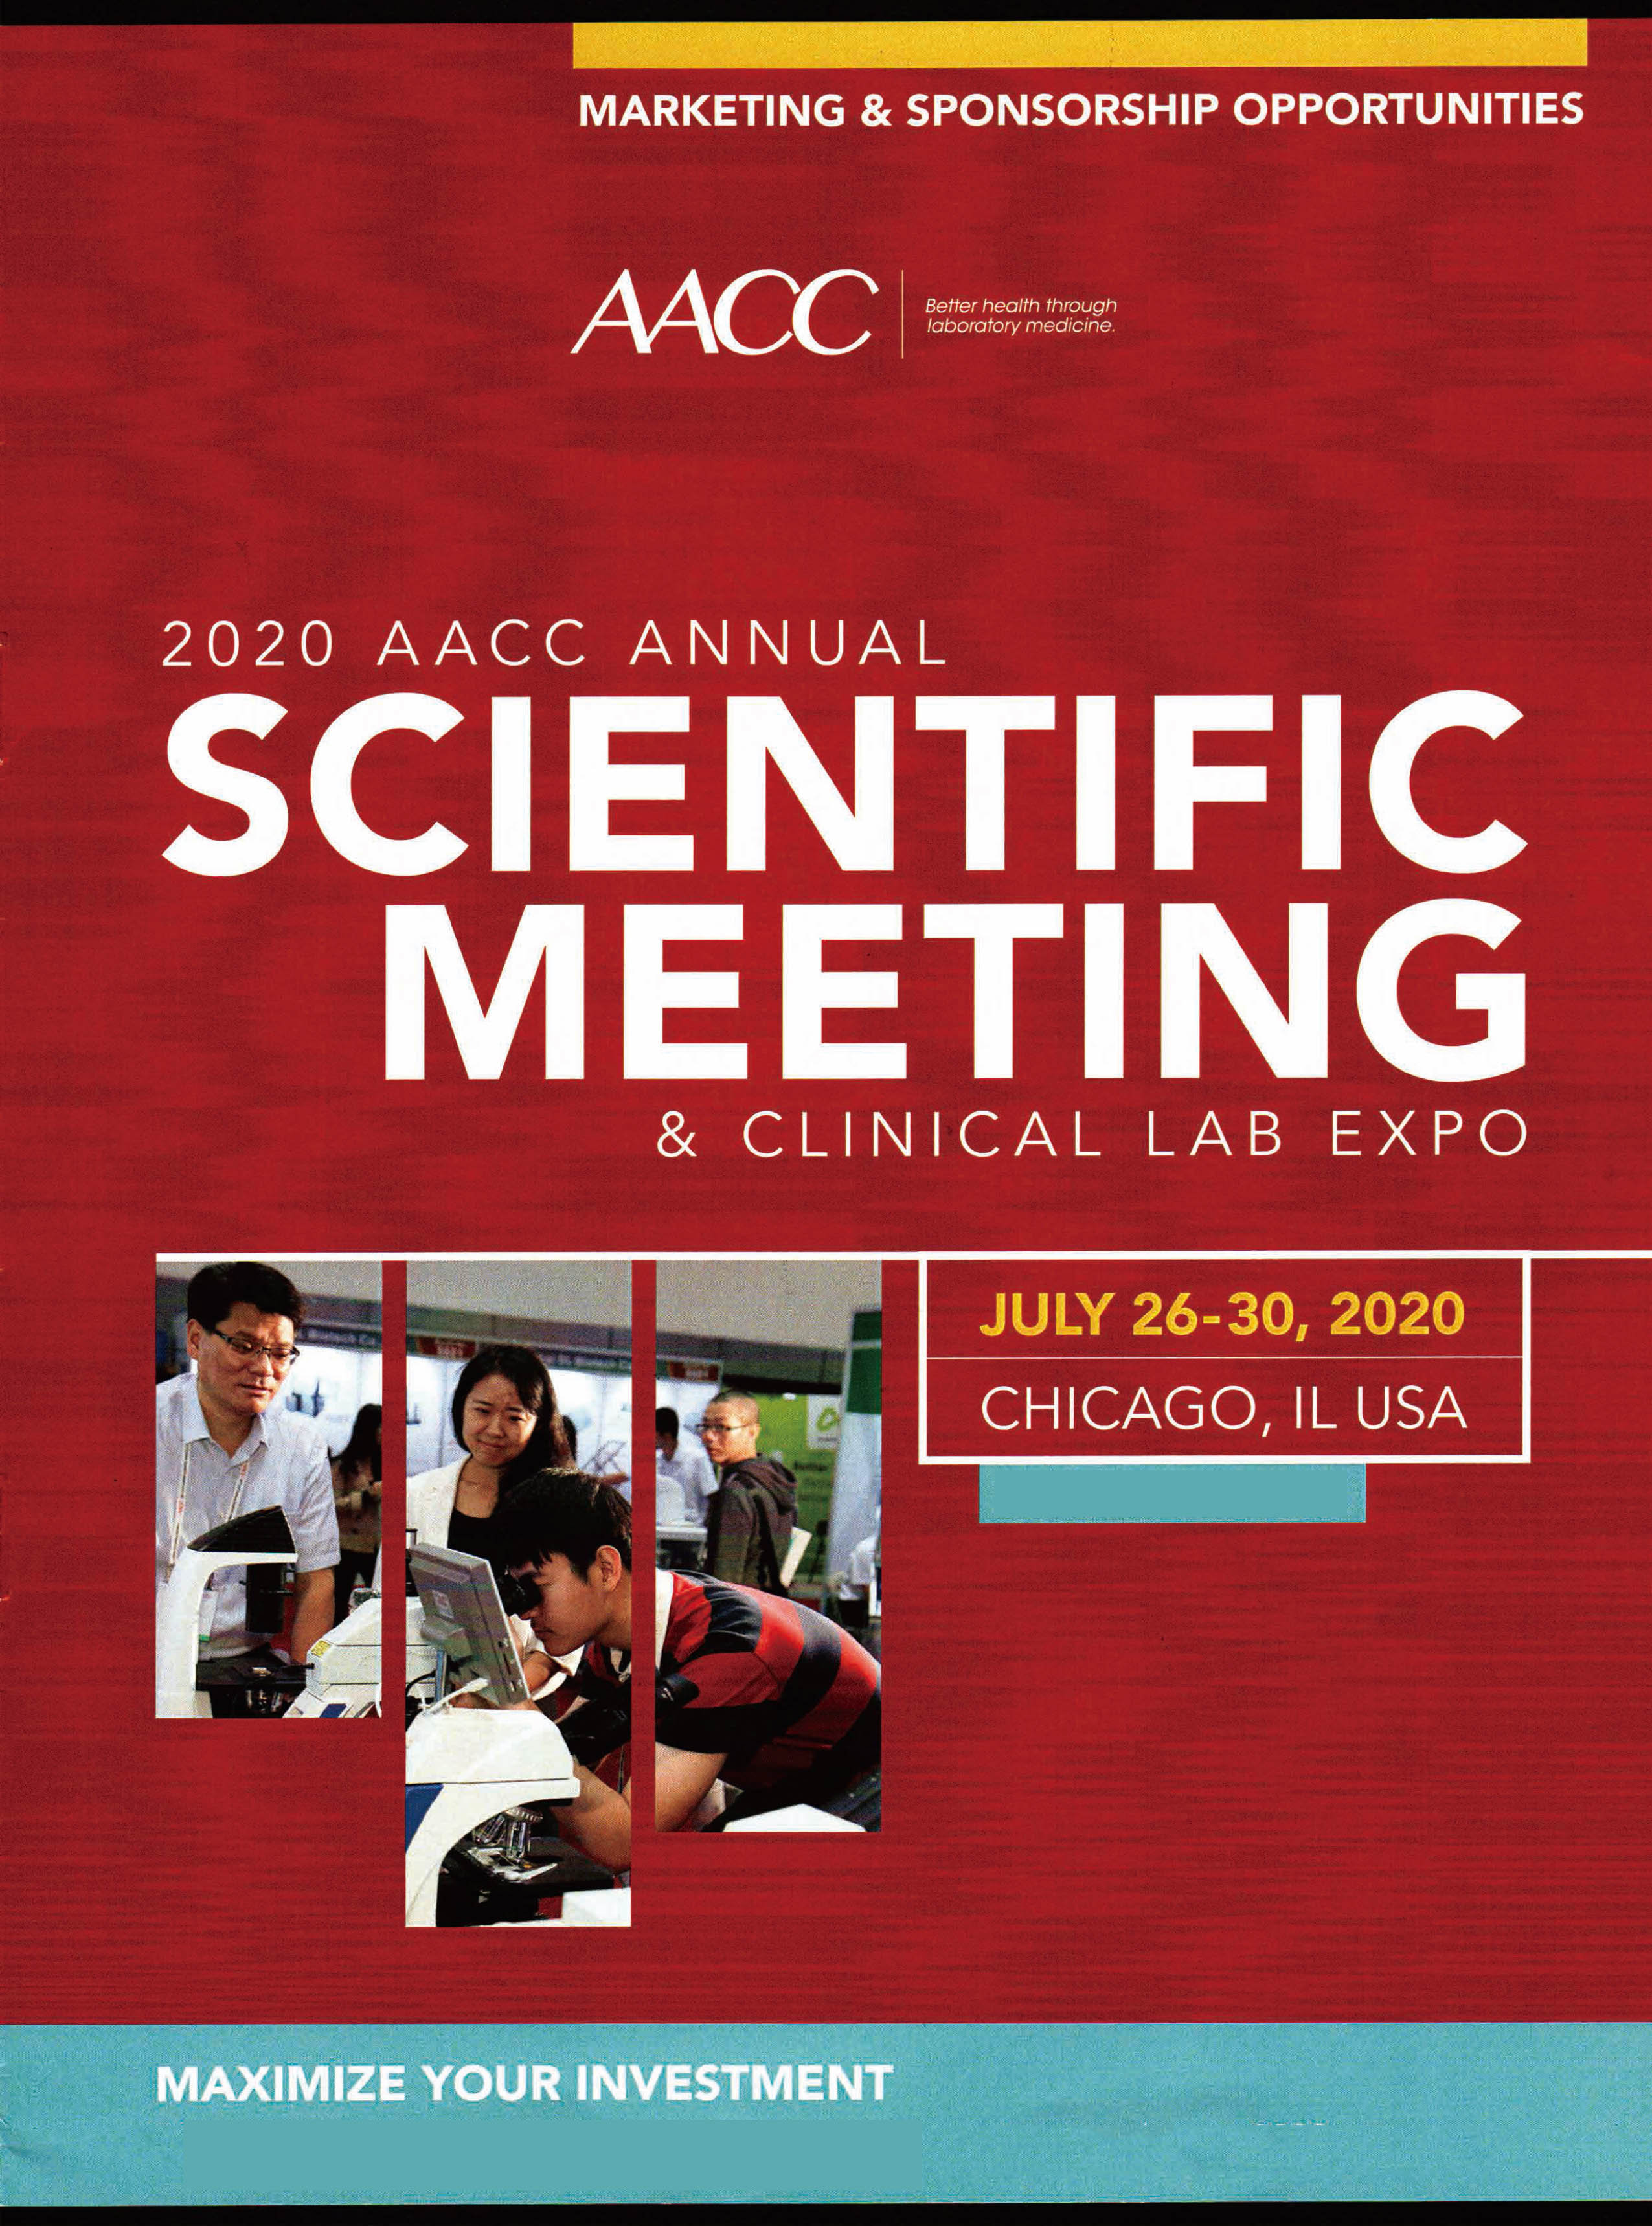 AACC ANNUAL SCIENTIFIC MEETING & CLINICAL EXPOConsultac Expo Co., Ltd